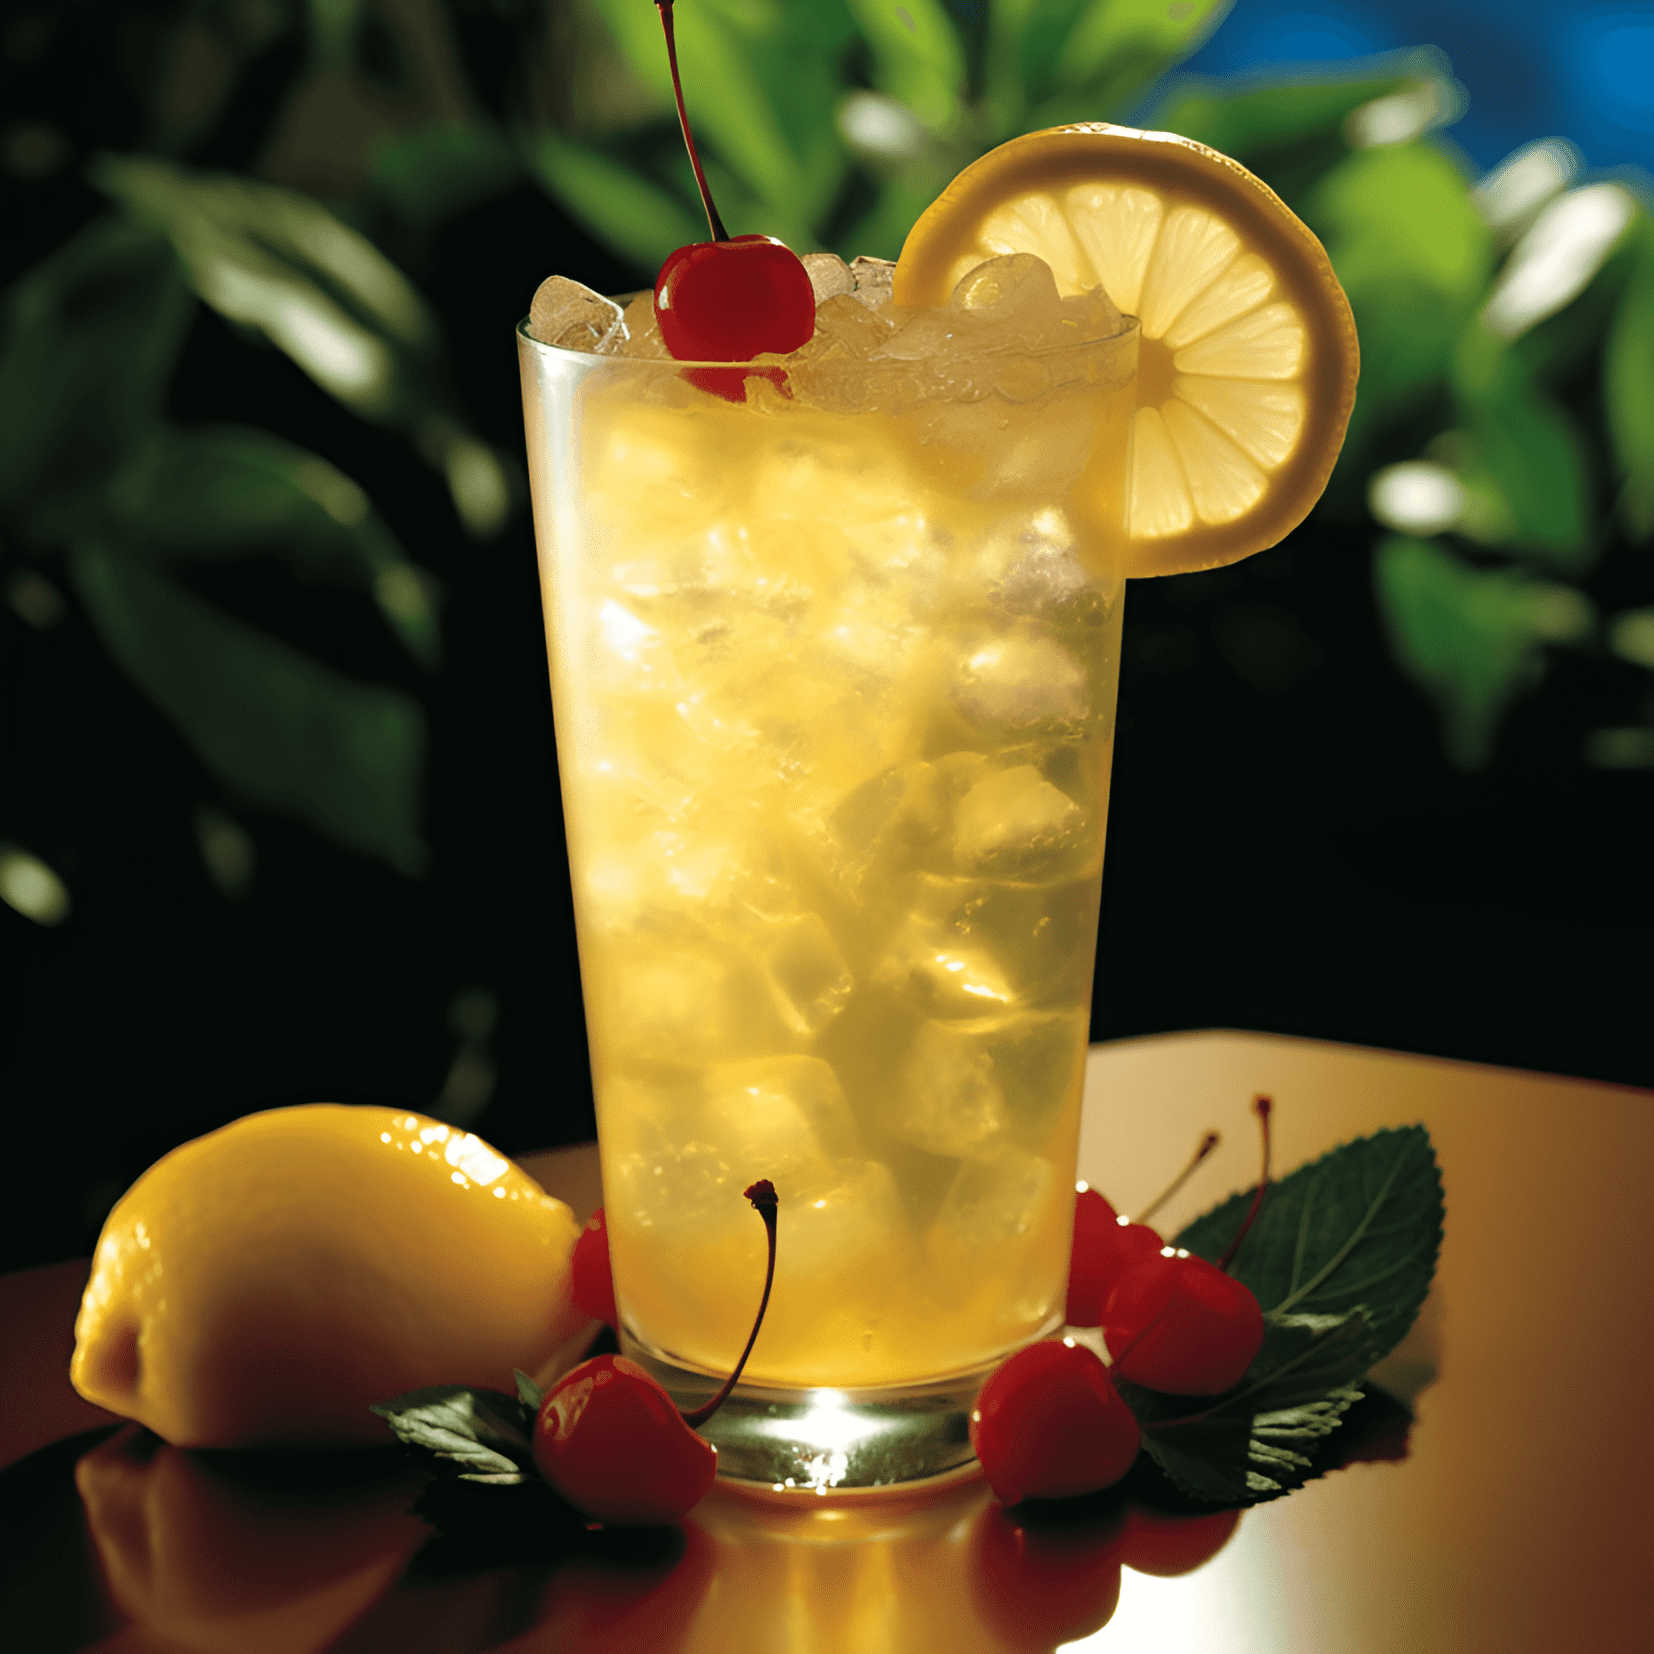 The Lynchburg Lemonade has a refreshing, sweet, and tangy taste with a hint of whiskey warmth. It's a well-balanced mix of sour, sweet, and slightly bitter flavors, making it a perfect summer drink.